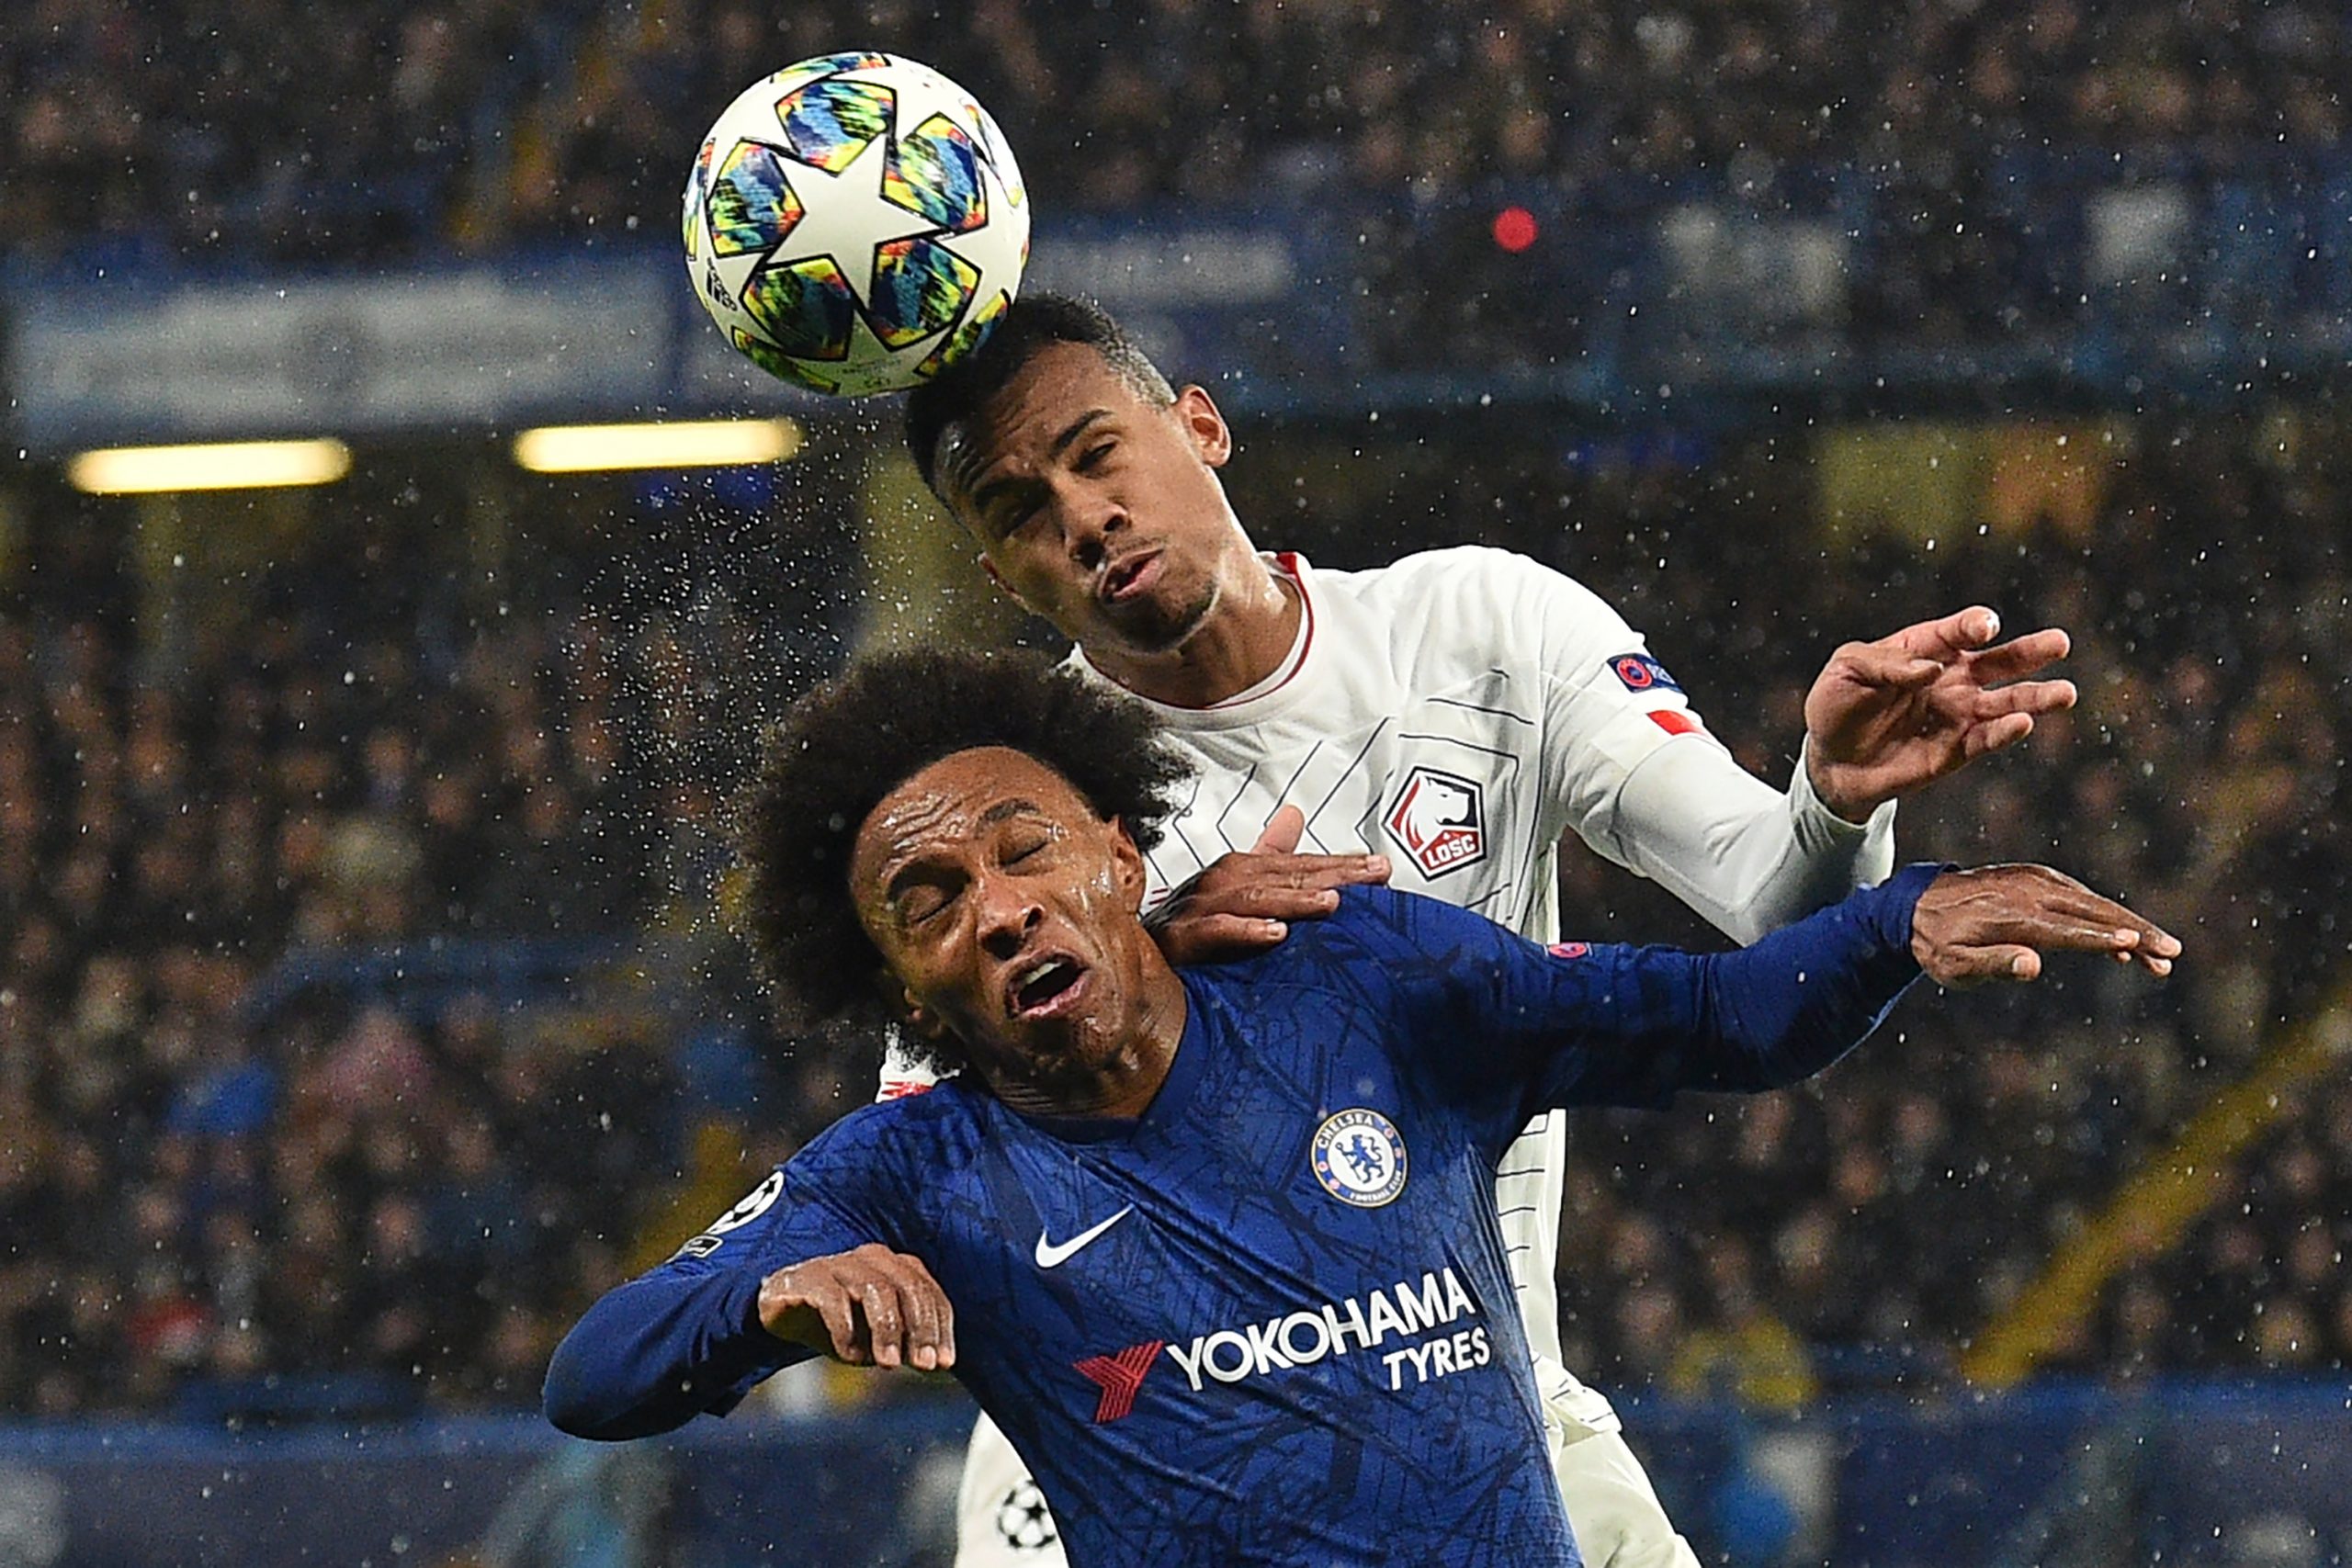 Chelsea's Brazilian midfielder Willian (L) vies with Lille's Brazilian defender Gabriel dos Santos Magalhaes during the UEFA Champion's League Group H football match between Chelsea and Lille at Stamford Bridge in London on December 10, 2019. (Photo by GLYN KIRK/AFP via Getty Images)